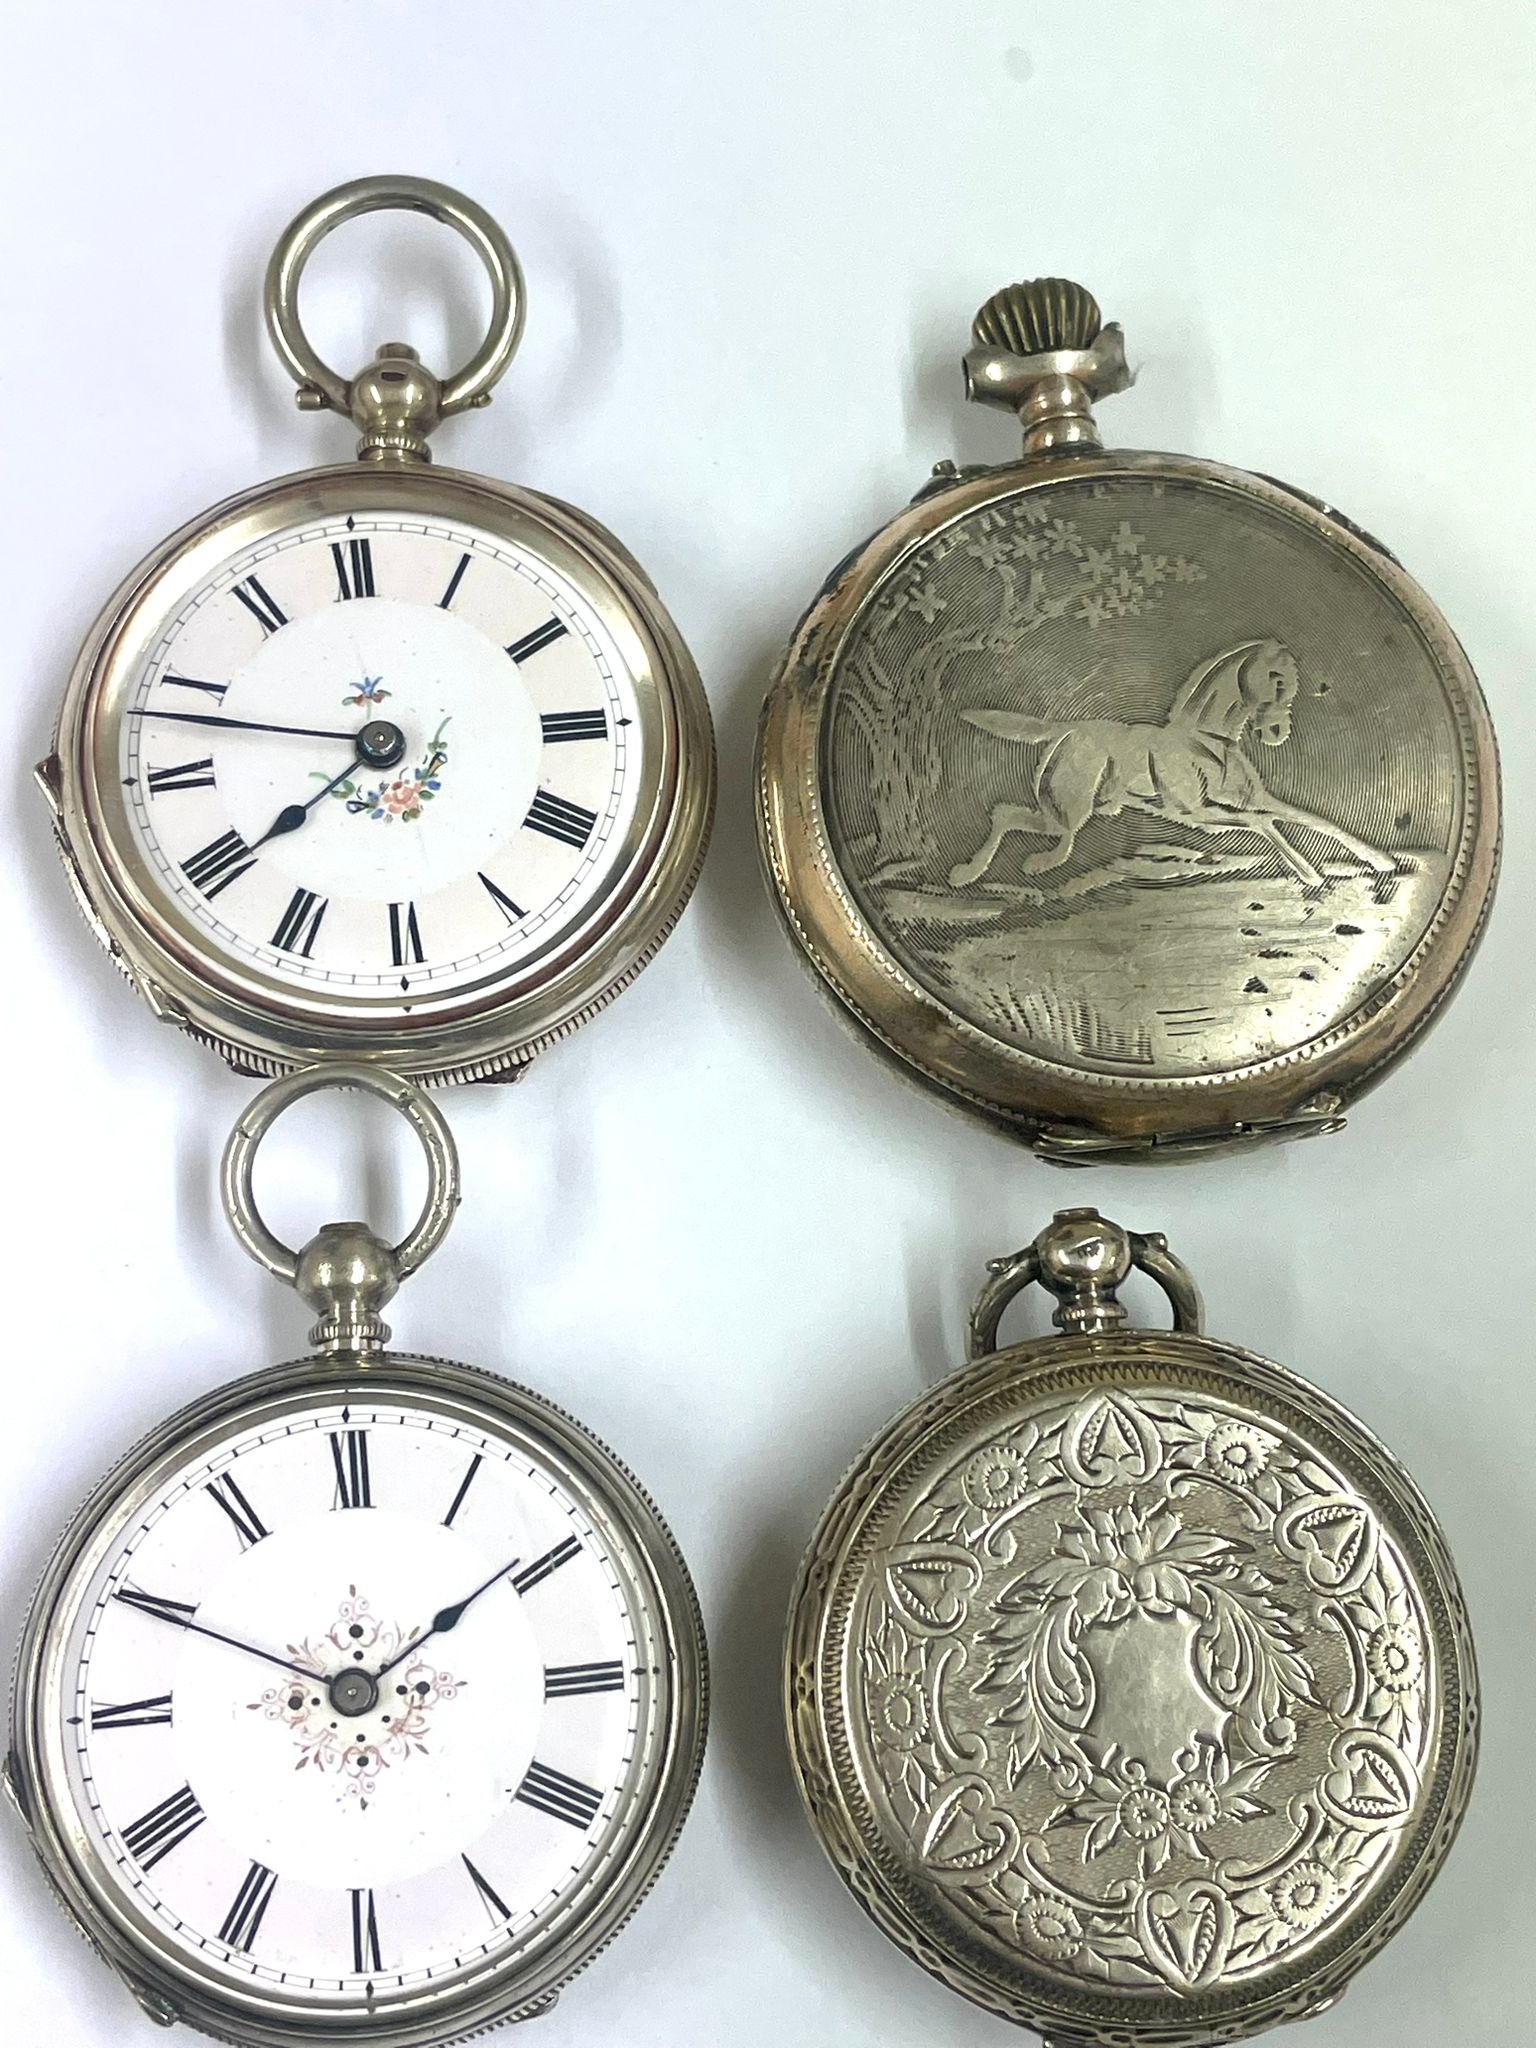 4x silver antique pocket watches as found - Image 2 of 2